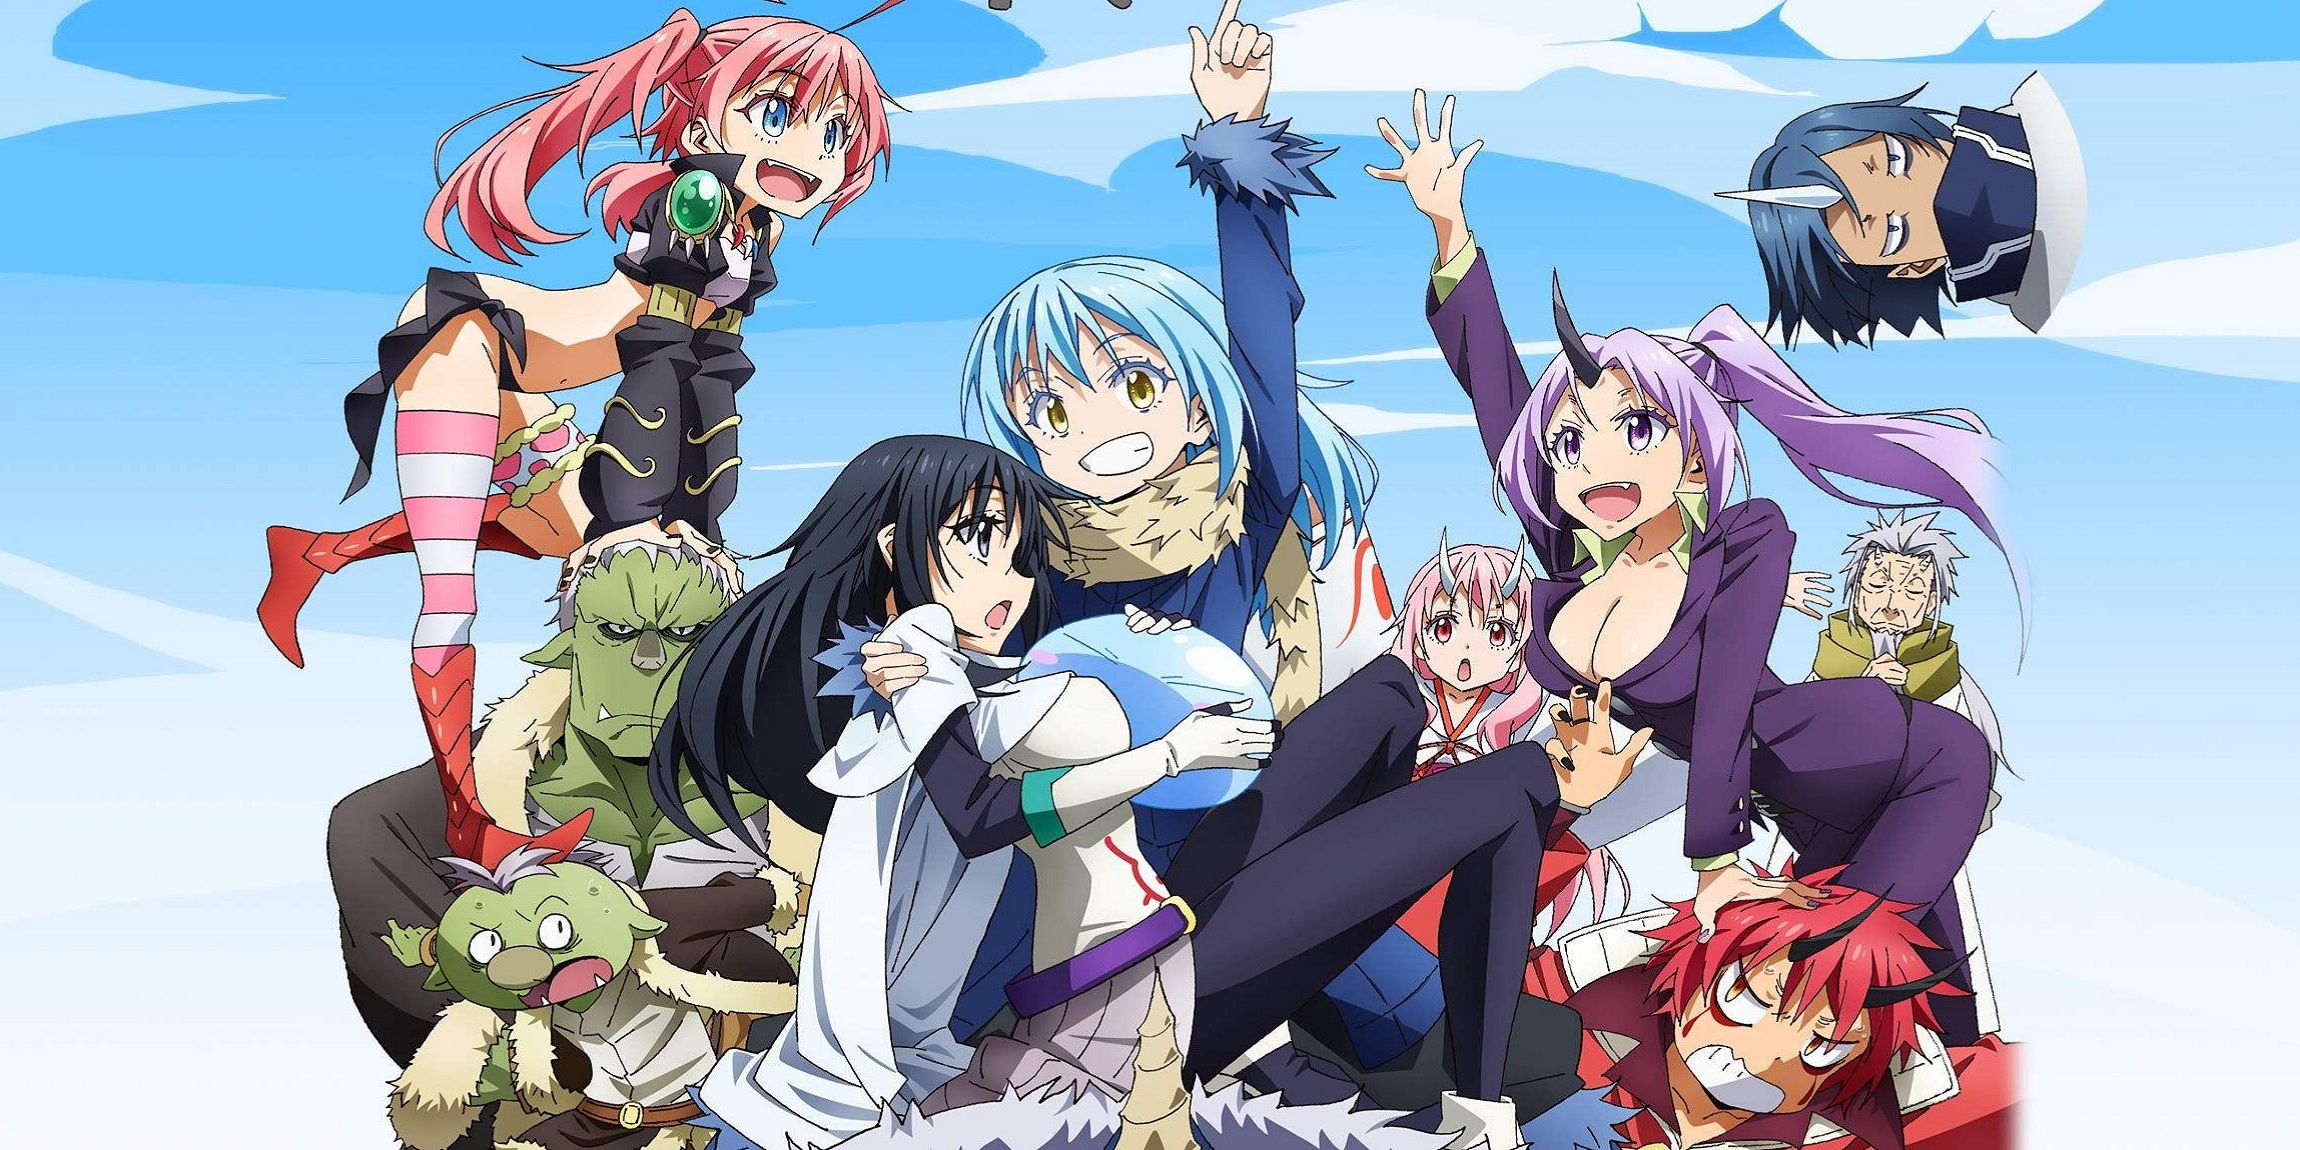 Cast of That Time I Got Reincarnated As A Slime